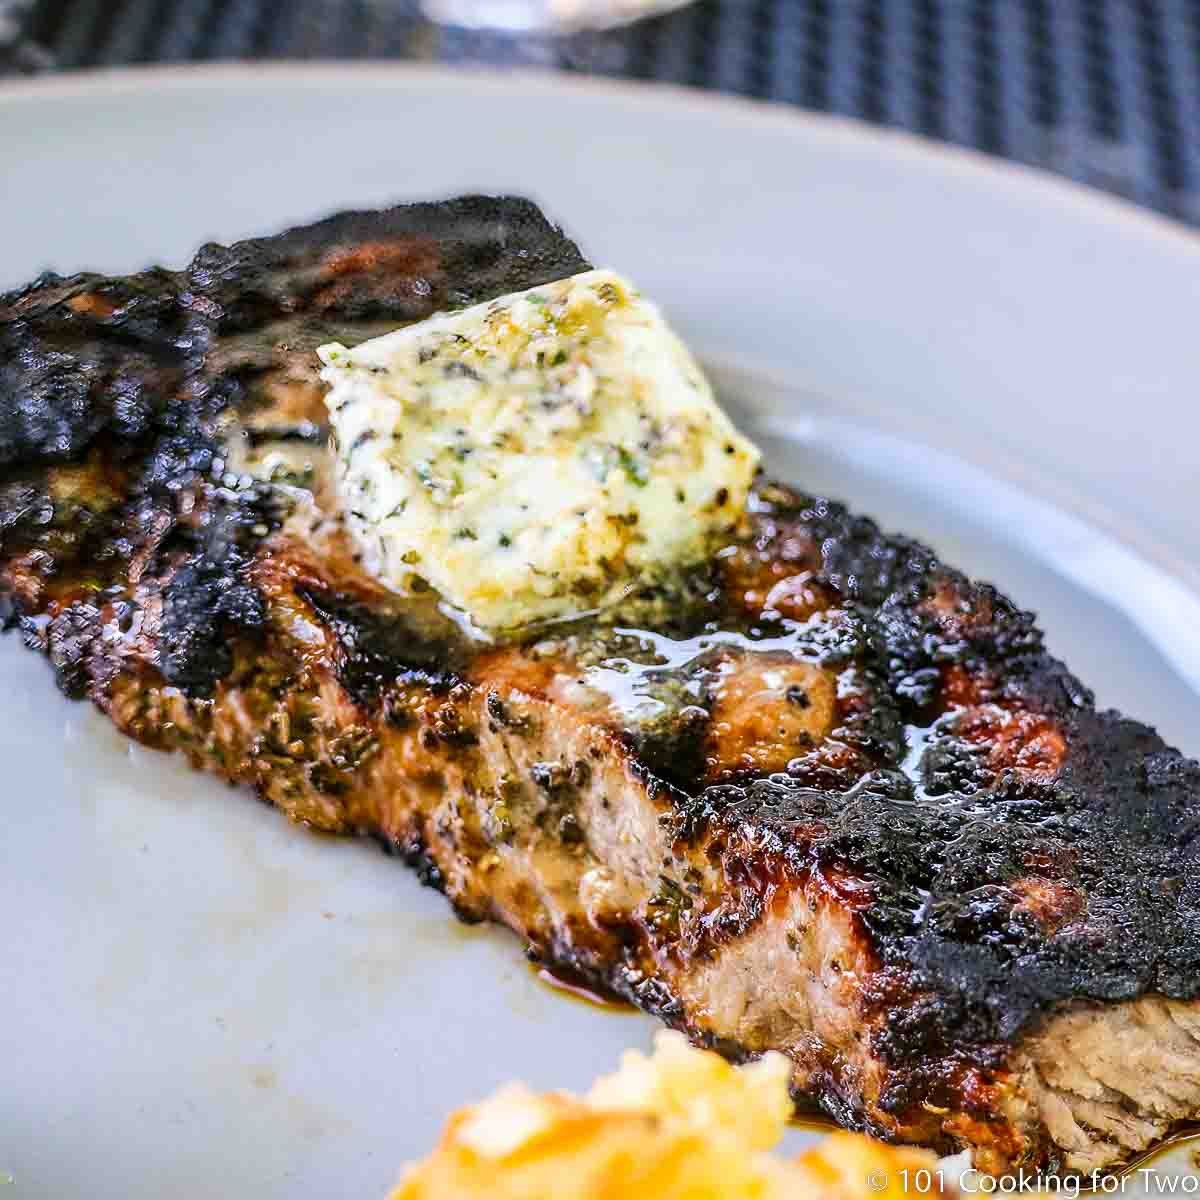 Image of Blue Cheese and Garlic Compound Butter on a strip steak